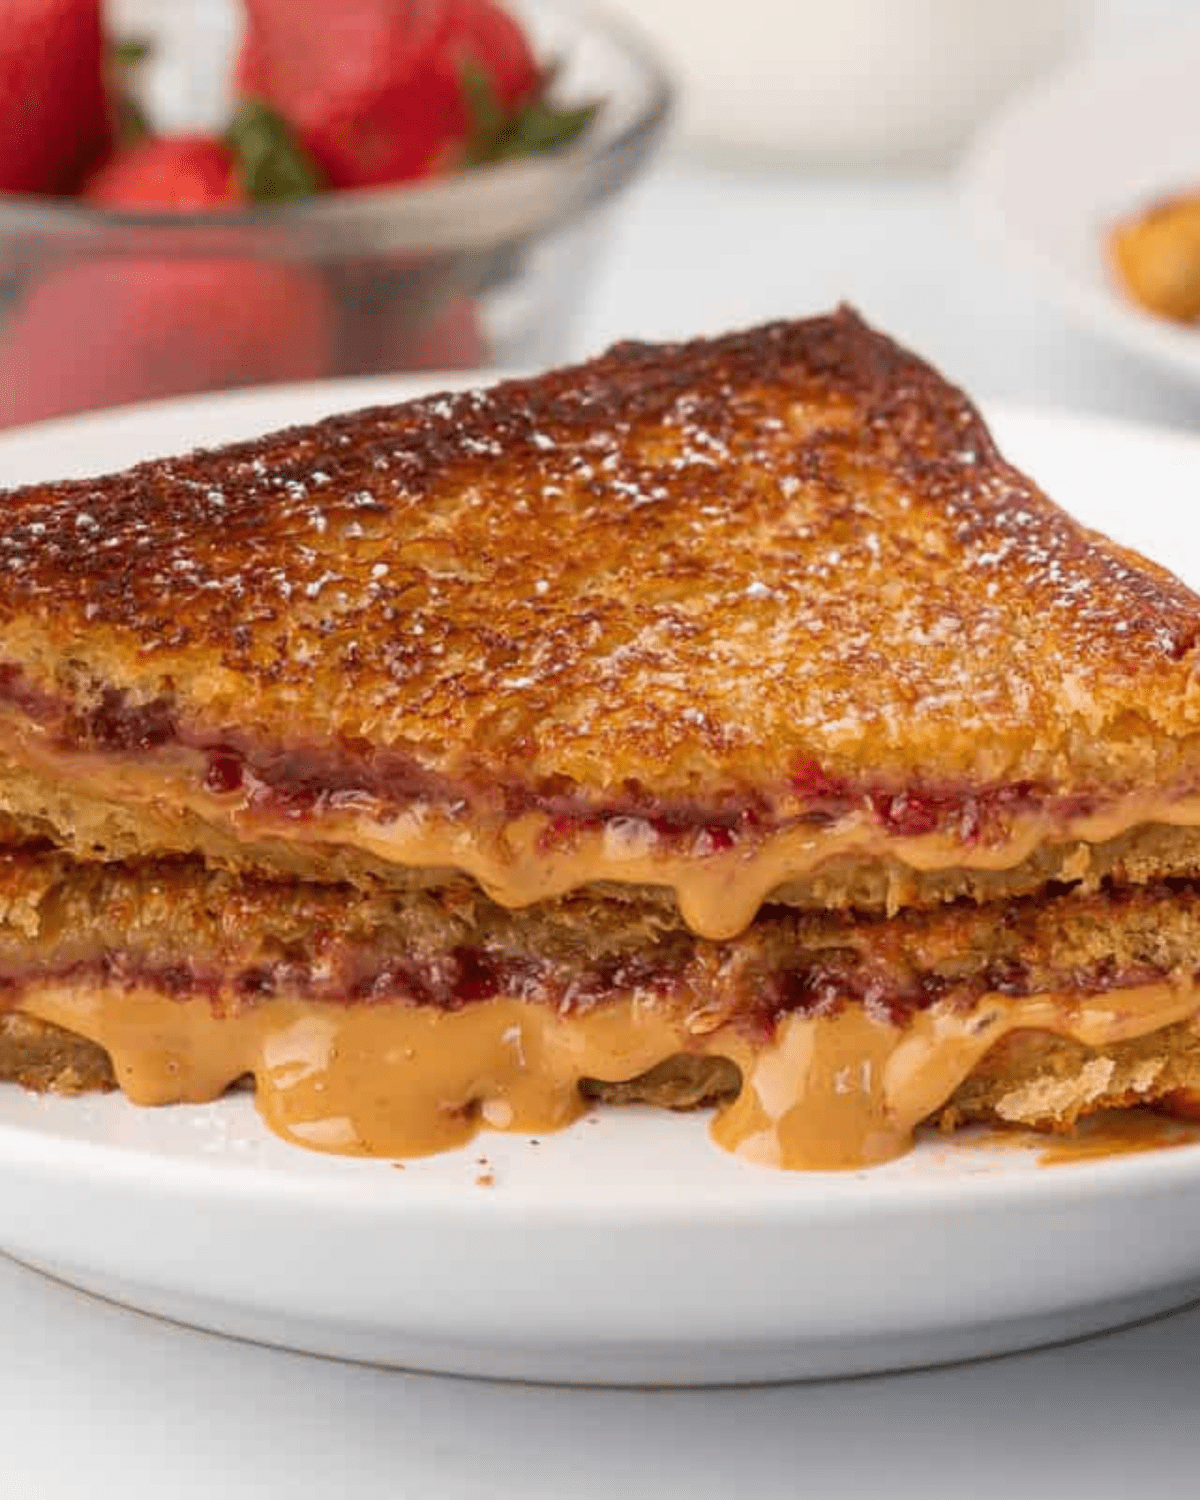 fried peanut butter and jelly sandwich on a white plate